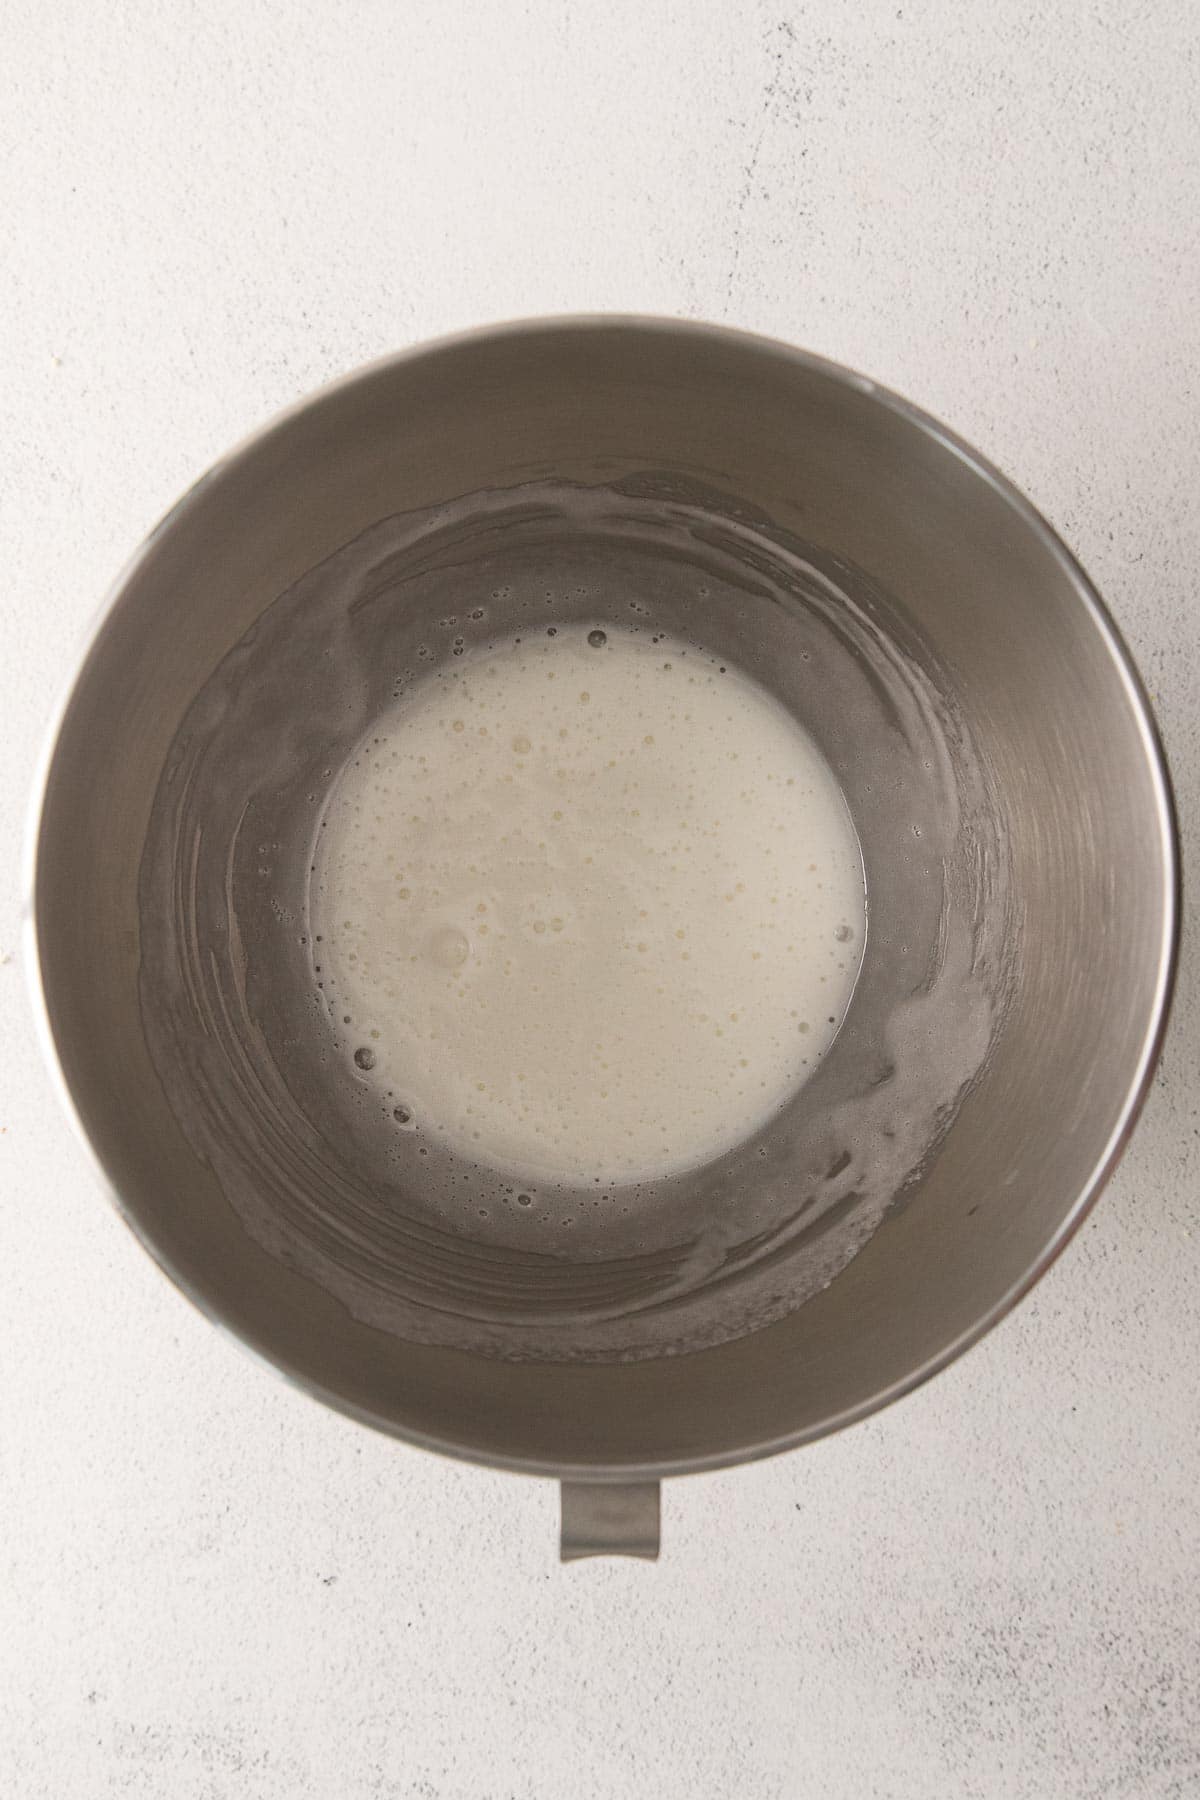 silver mixing bowl with egg white and sugar mixture